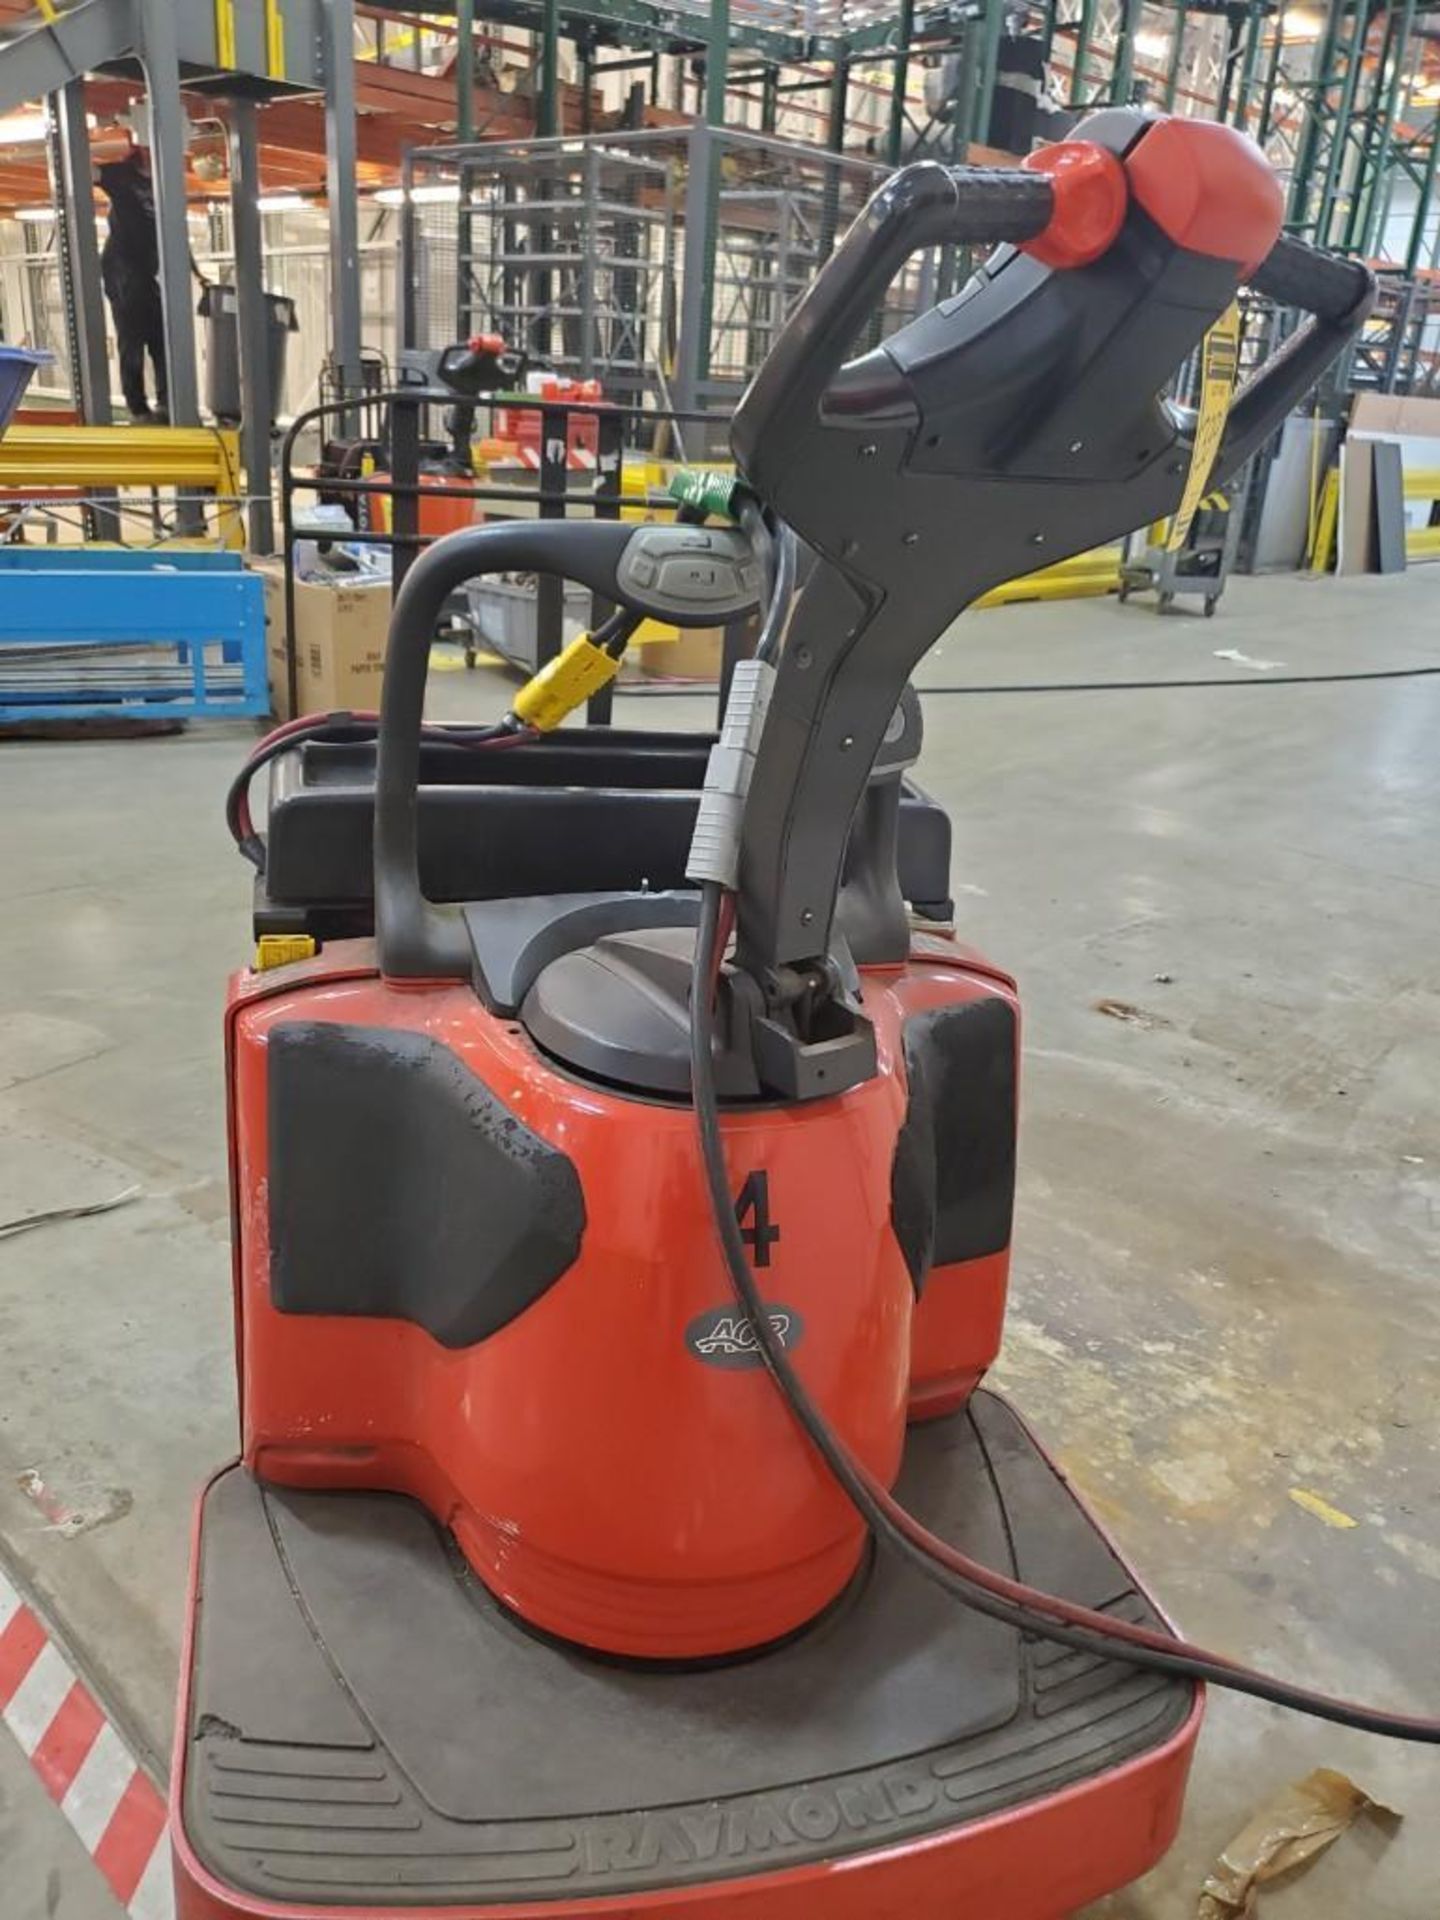 2012 RAYMOND 6,000 LB. CAPACITY ELECTRIC PALLET TRUCK; MODEL 8410, S/N 841-12-12011, WITH IWAREHOUSE - Image 2 of 5